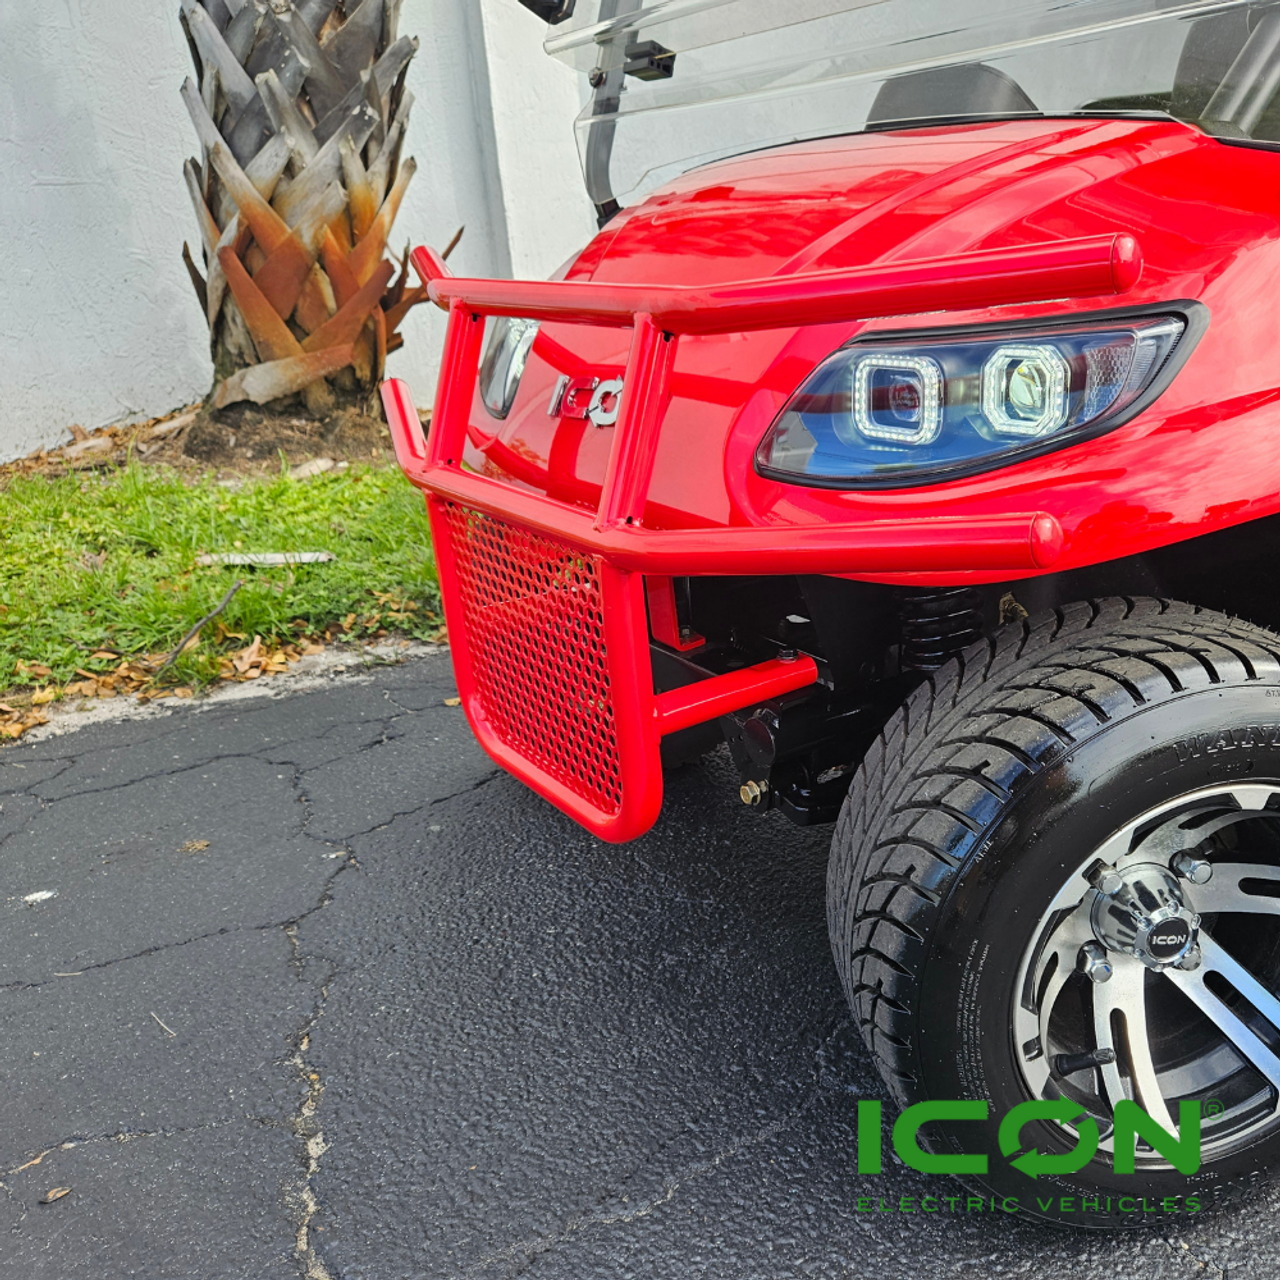 Red Steel Brush Guard for ICON i20, i40, i60, i80 Non-Lifted Golf Cart Models, BRG-702-IC-RED, 2.08.001.000081